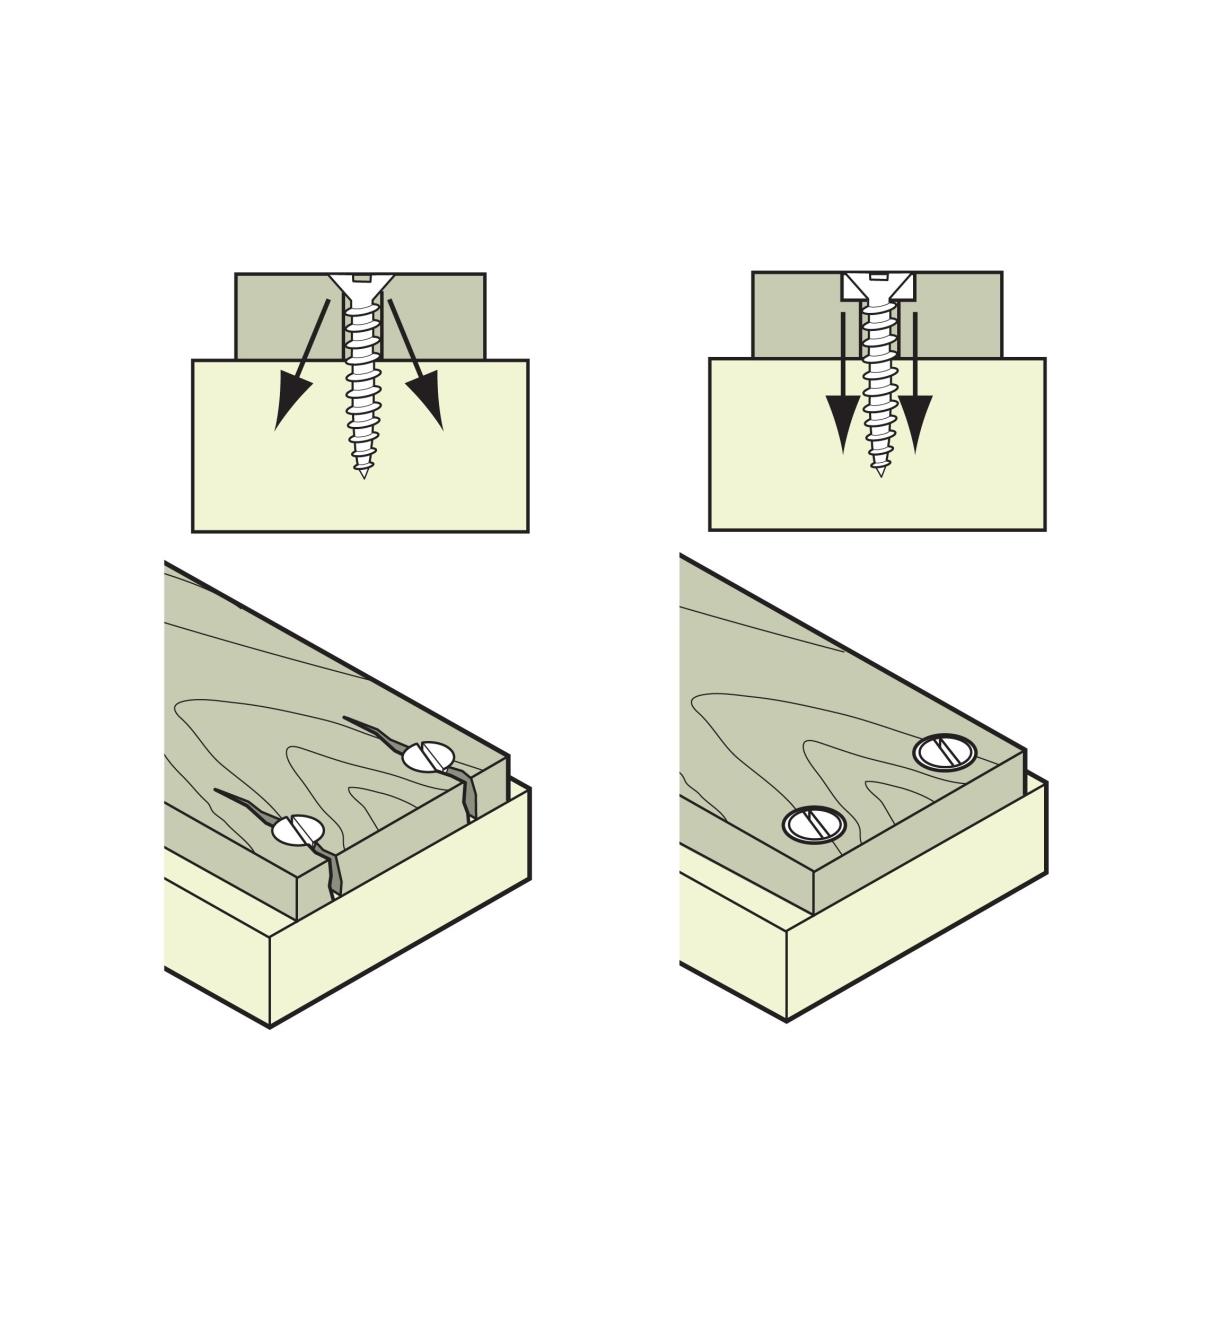 Illustrations of screws used without washers versus screws used with washers